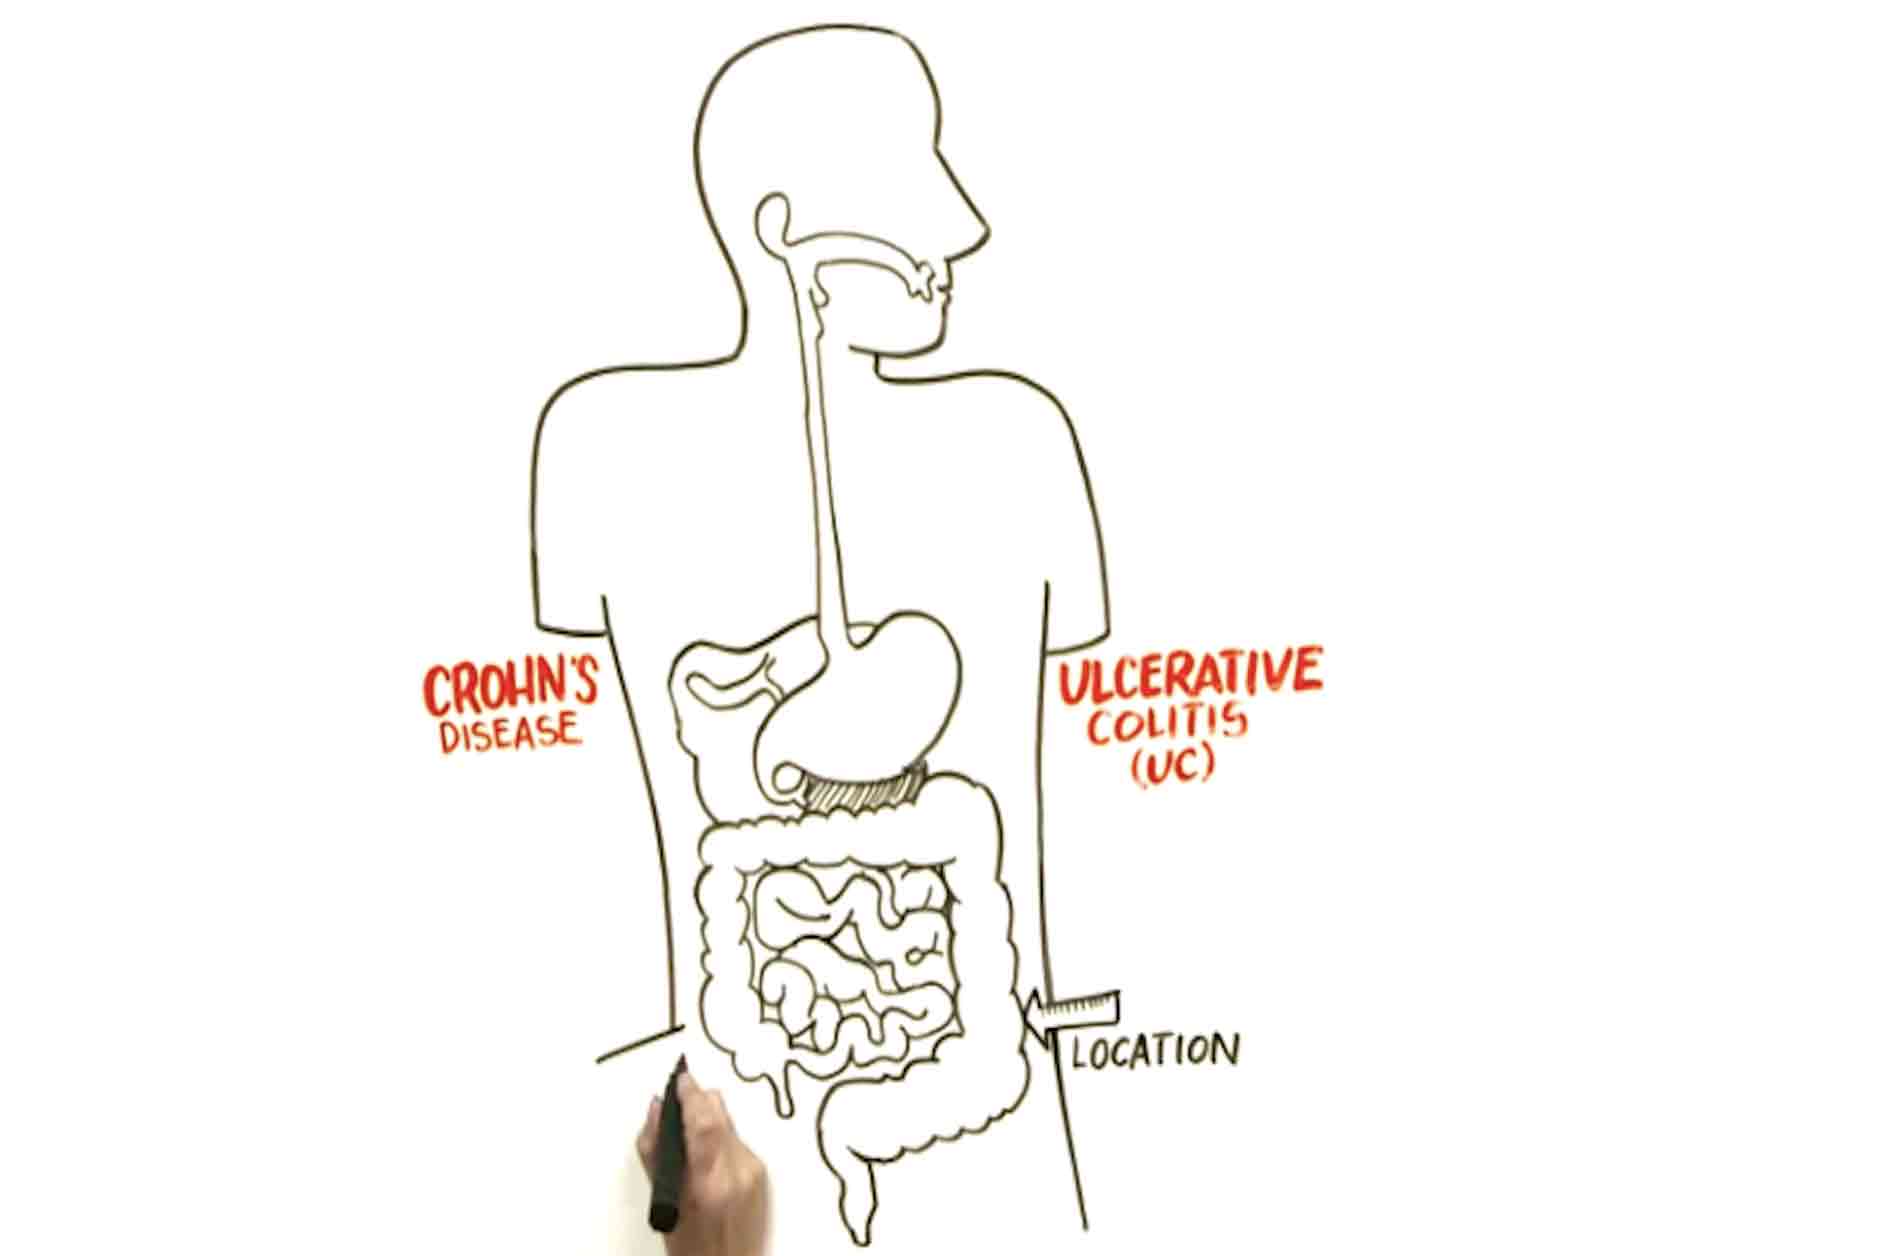 How have treatments for Crohn's disease progressed?